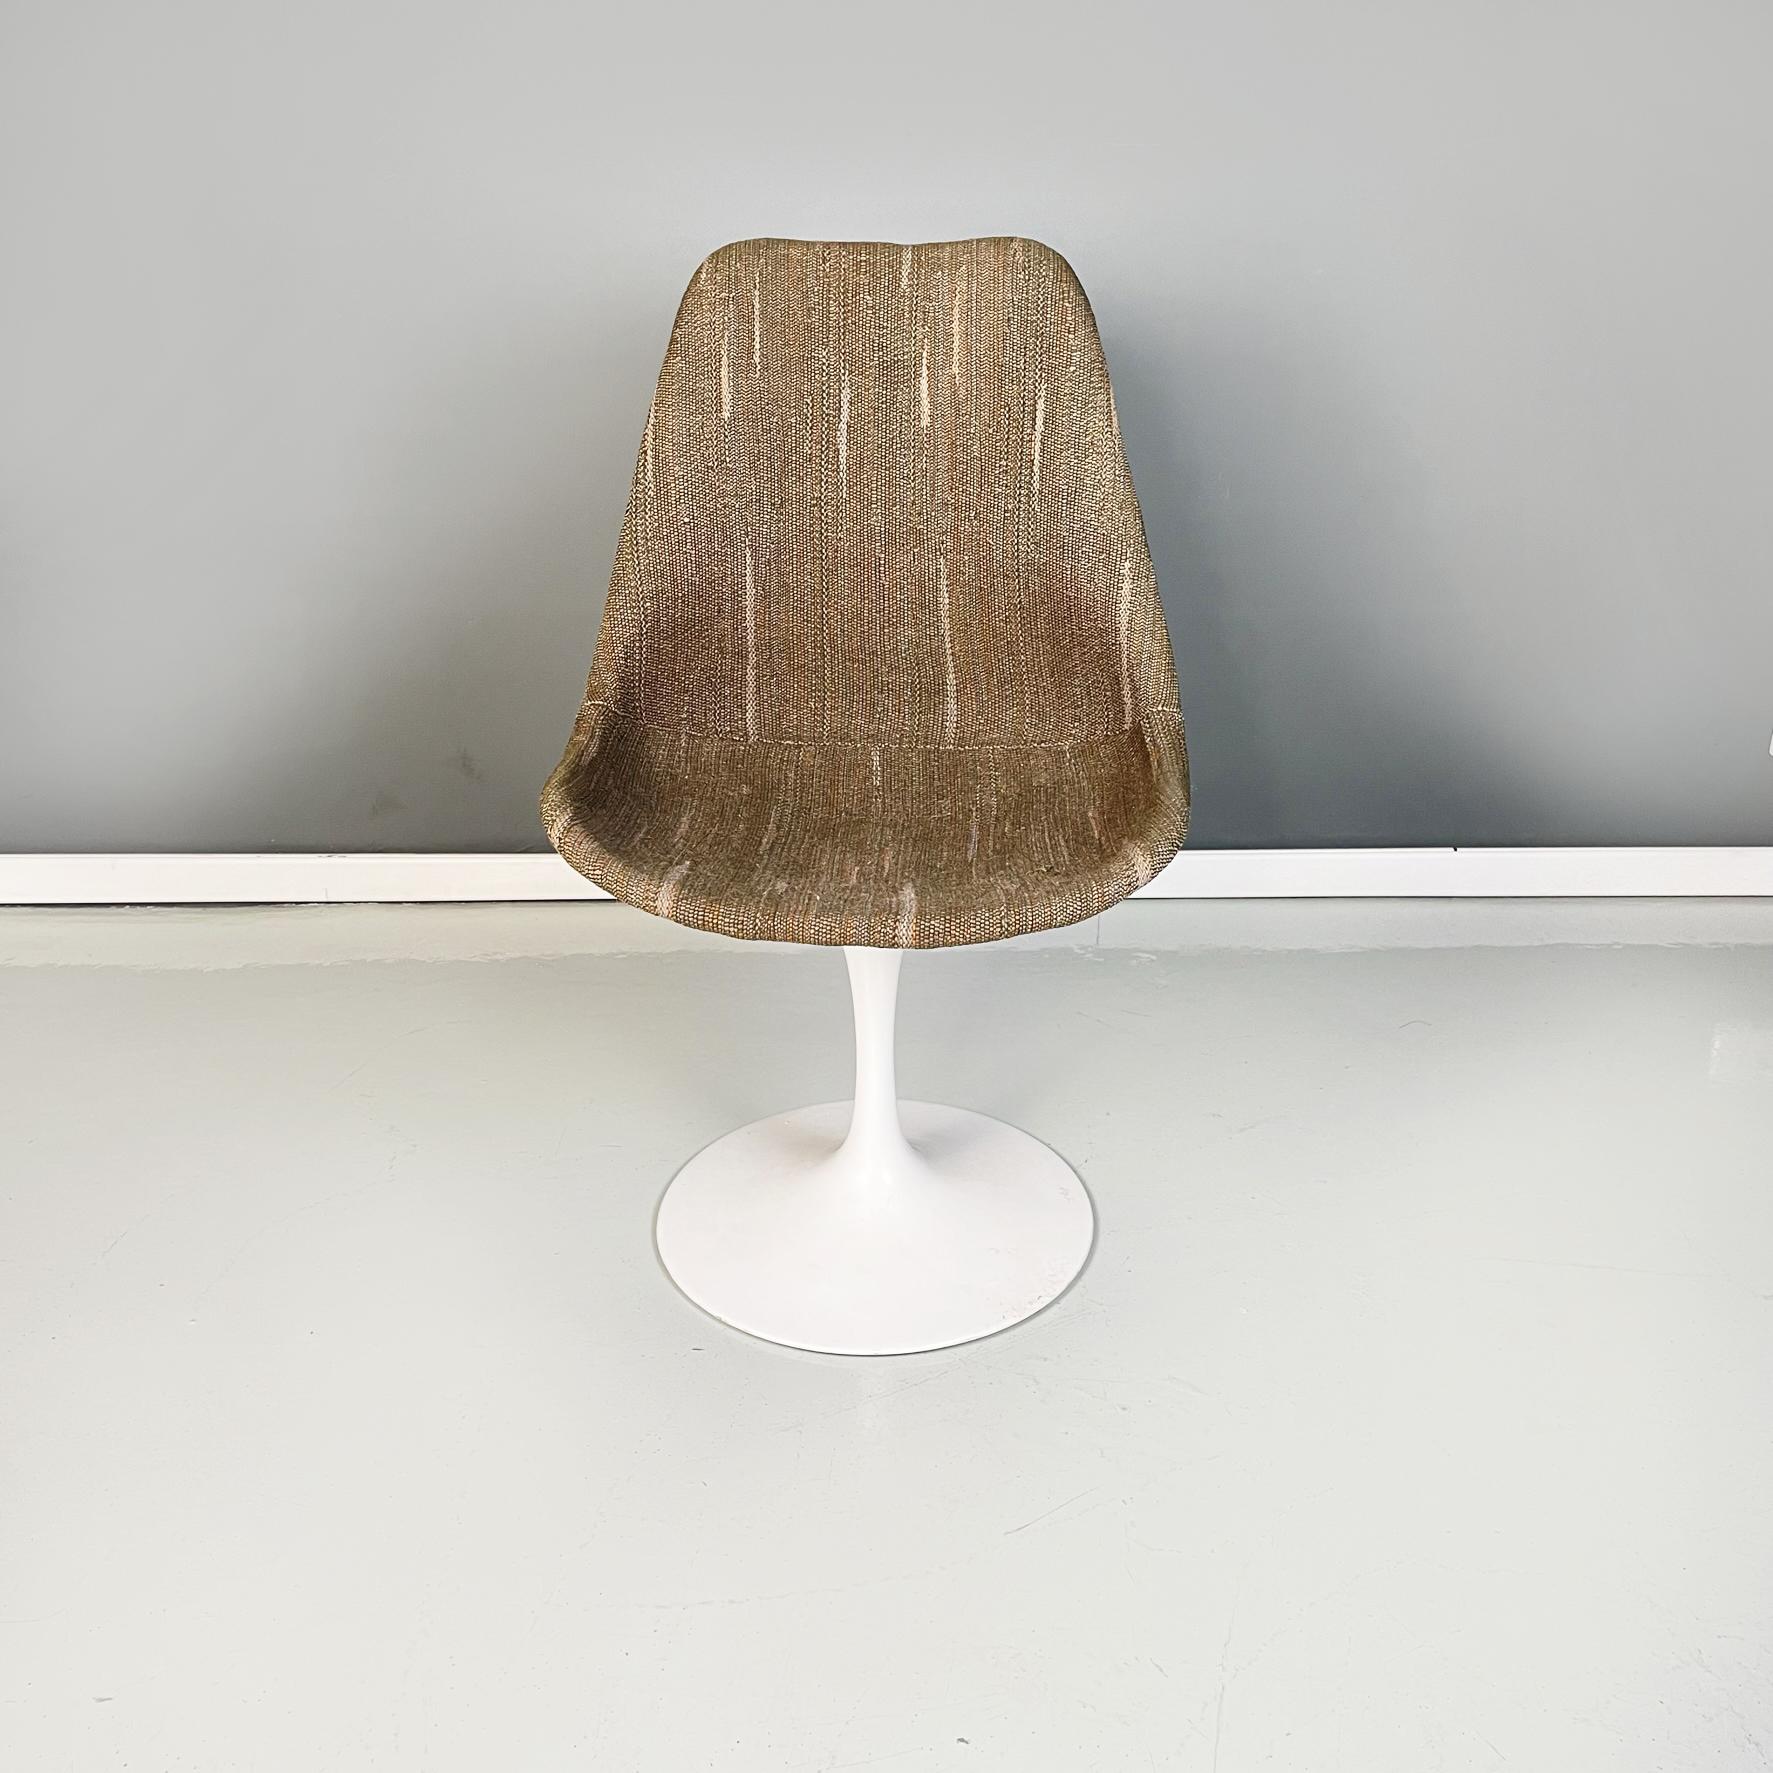 American space age brown fabric Tulip Armless chair by Eero Saarinen for Knoll, 1970s
Iconic and elegant Tulip armless chair with round base in white painted metal. The seat and backrest have a white abs plastic structure, light padding and a